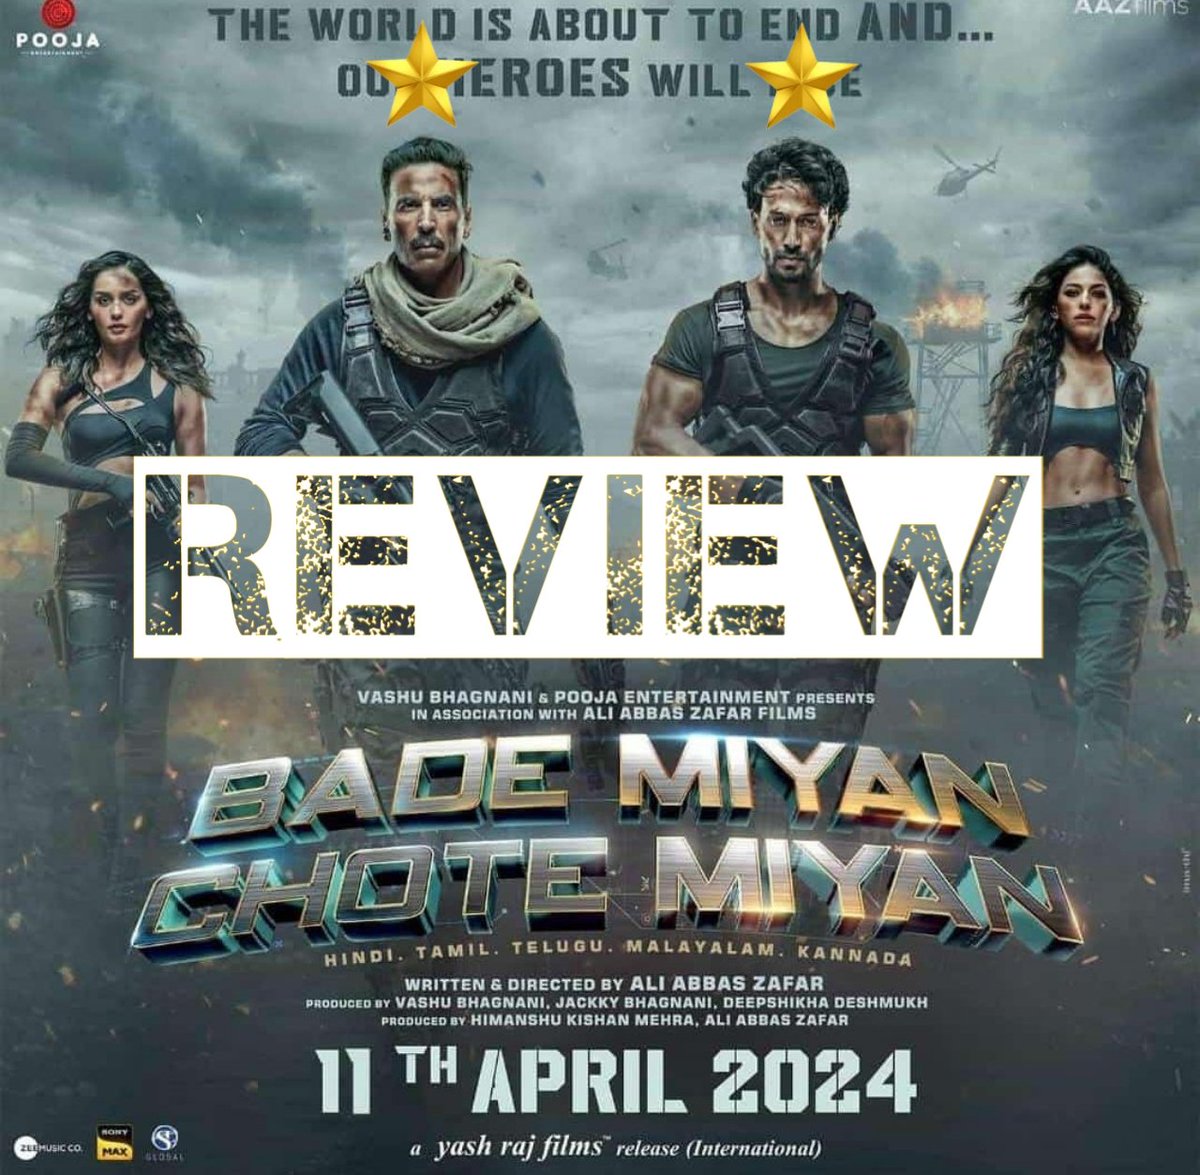 Movie Review : #BMCMReview My Word Review is a : Average #BMCM is a such a Average Movie in this story totally Dull and Casting Average But Dialogue Superb and BGM Hit #AkshayKumar Better But #TigerShroff Disappointed 😞 #BadeMiyanChoteMiyan #Eid2024